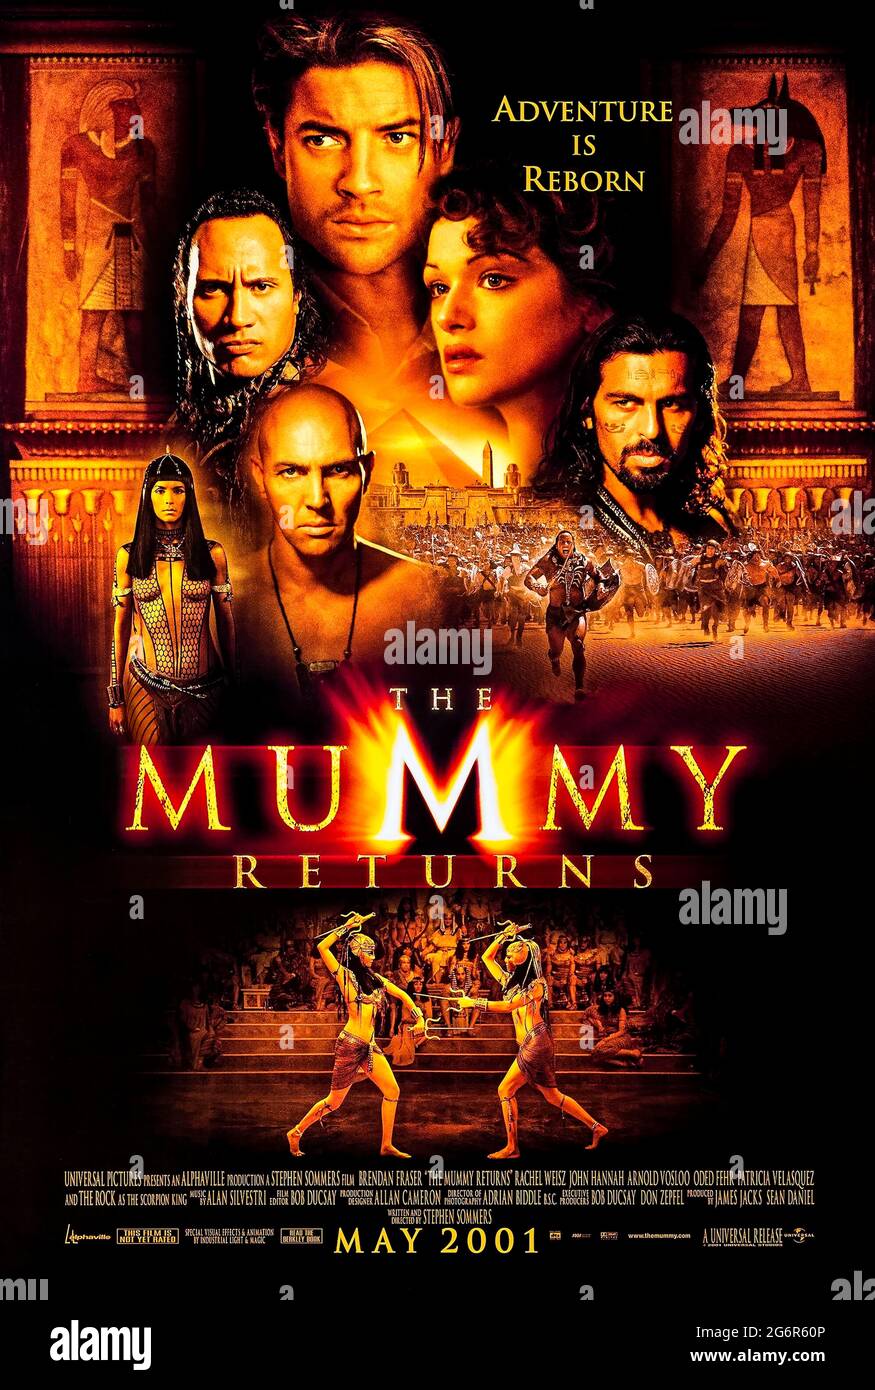 The Mummy Returns (2001) directed by Stephen Sommers and starring Brendan Fraser, Rachel Weisz, Arnold Vosloo and John Hannah. The mummified body of Imhotep is shipped to a museum in London, where he once again wakes and begins his campaign of rage and terror. Stock Photo